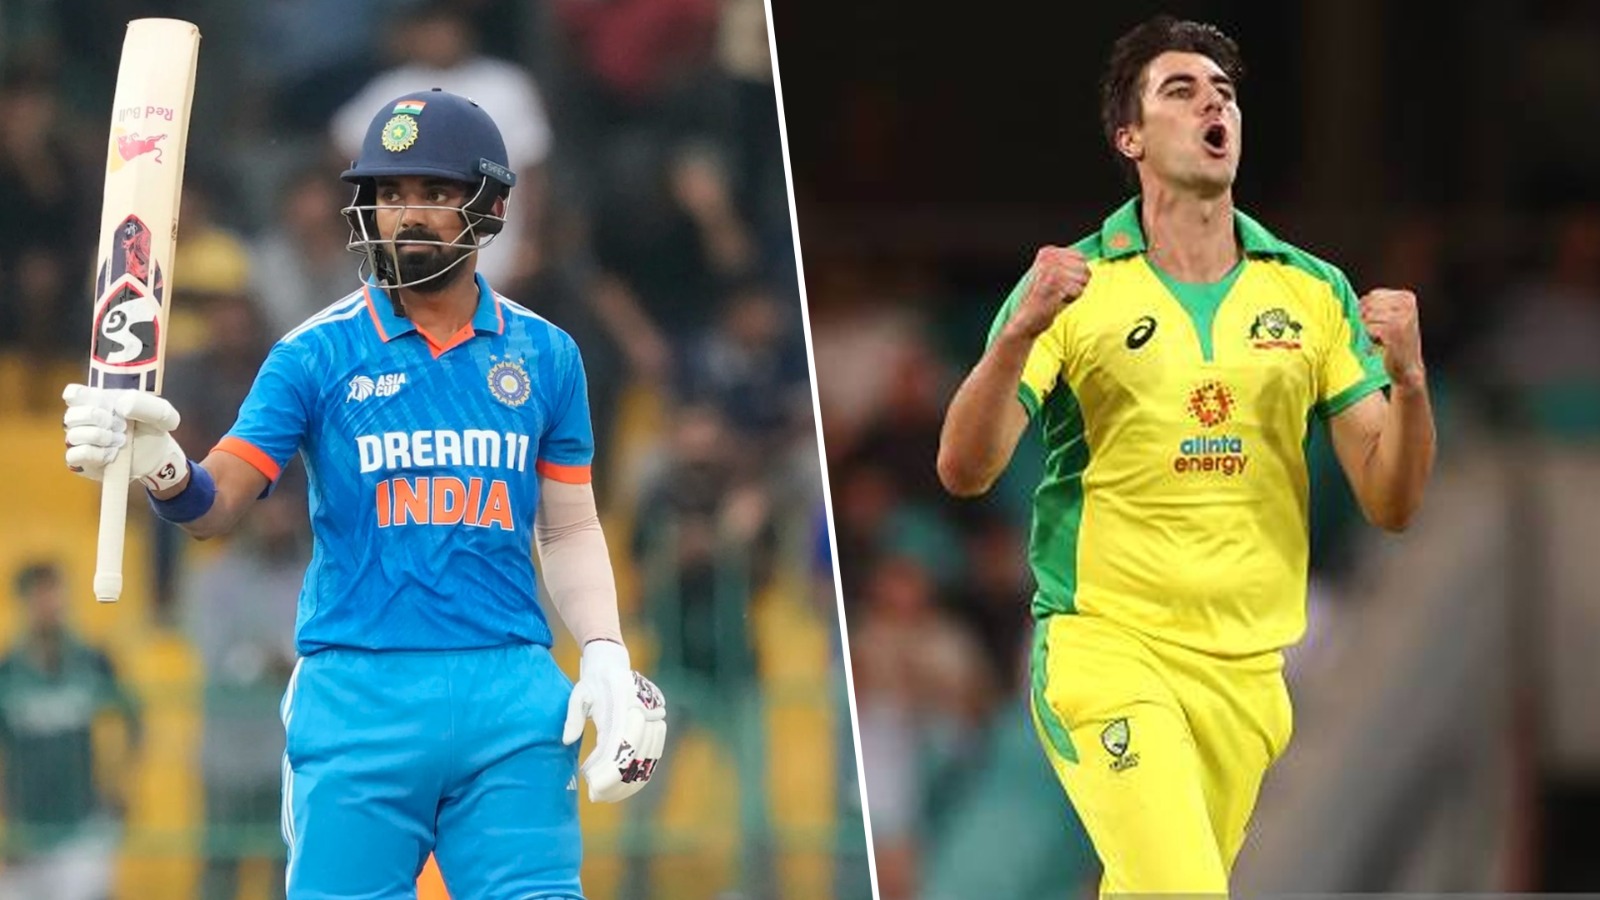 Ind vs Aus: Pitch Report, Weather Forecast And Possible Playing XI Of Both Teams